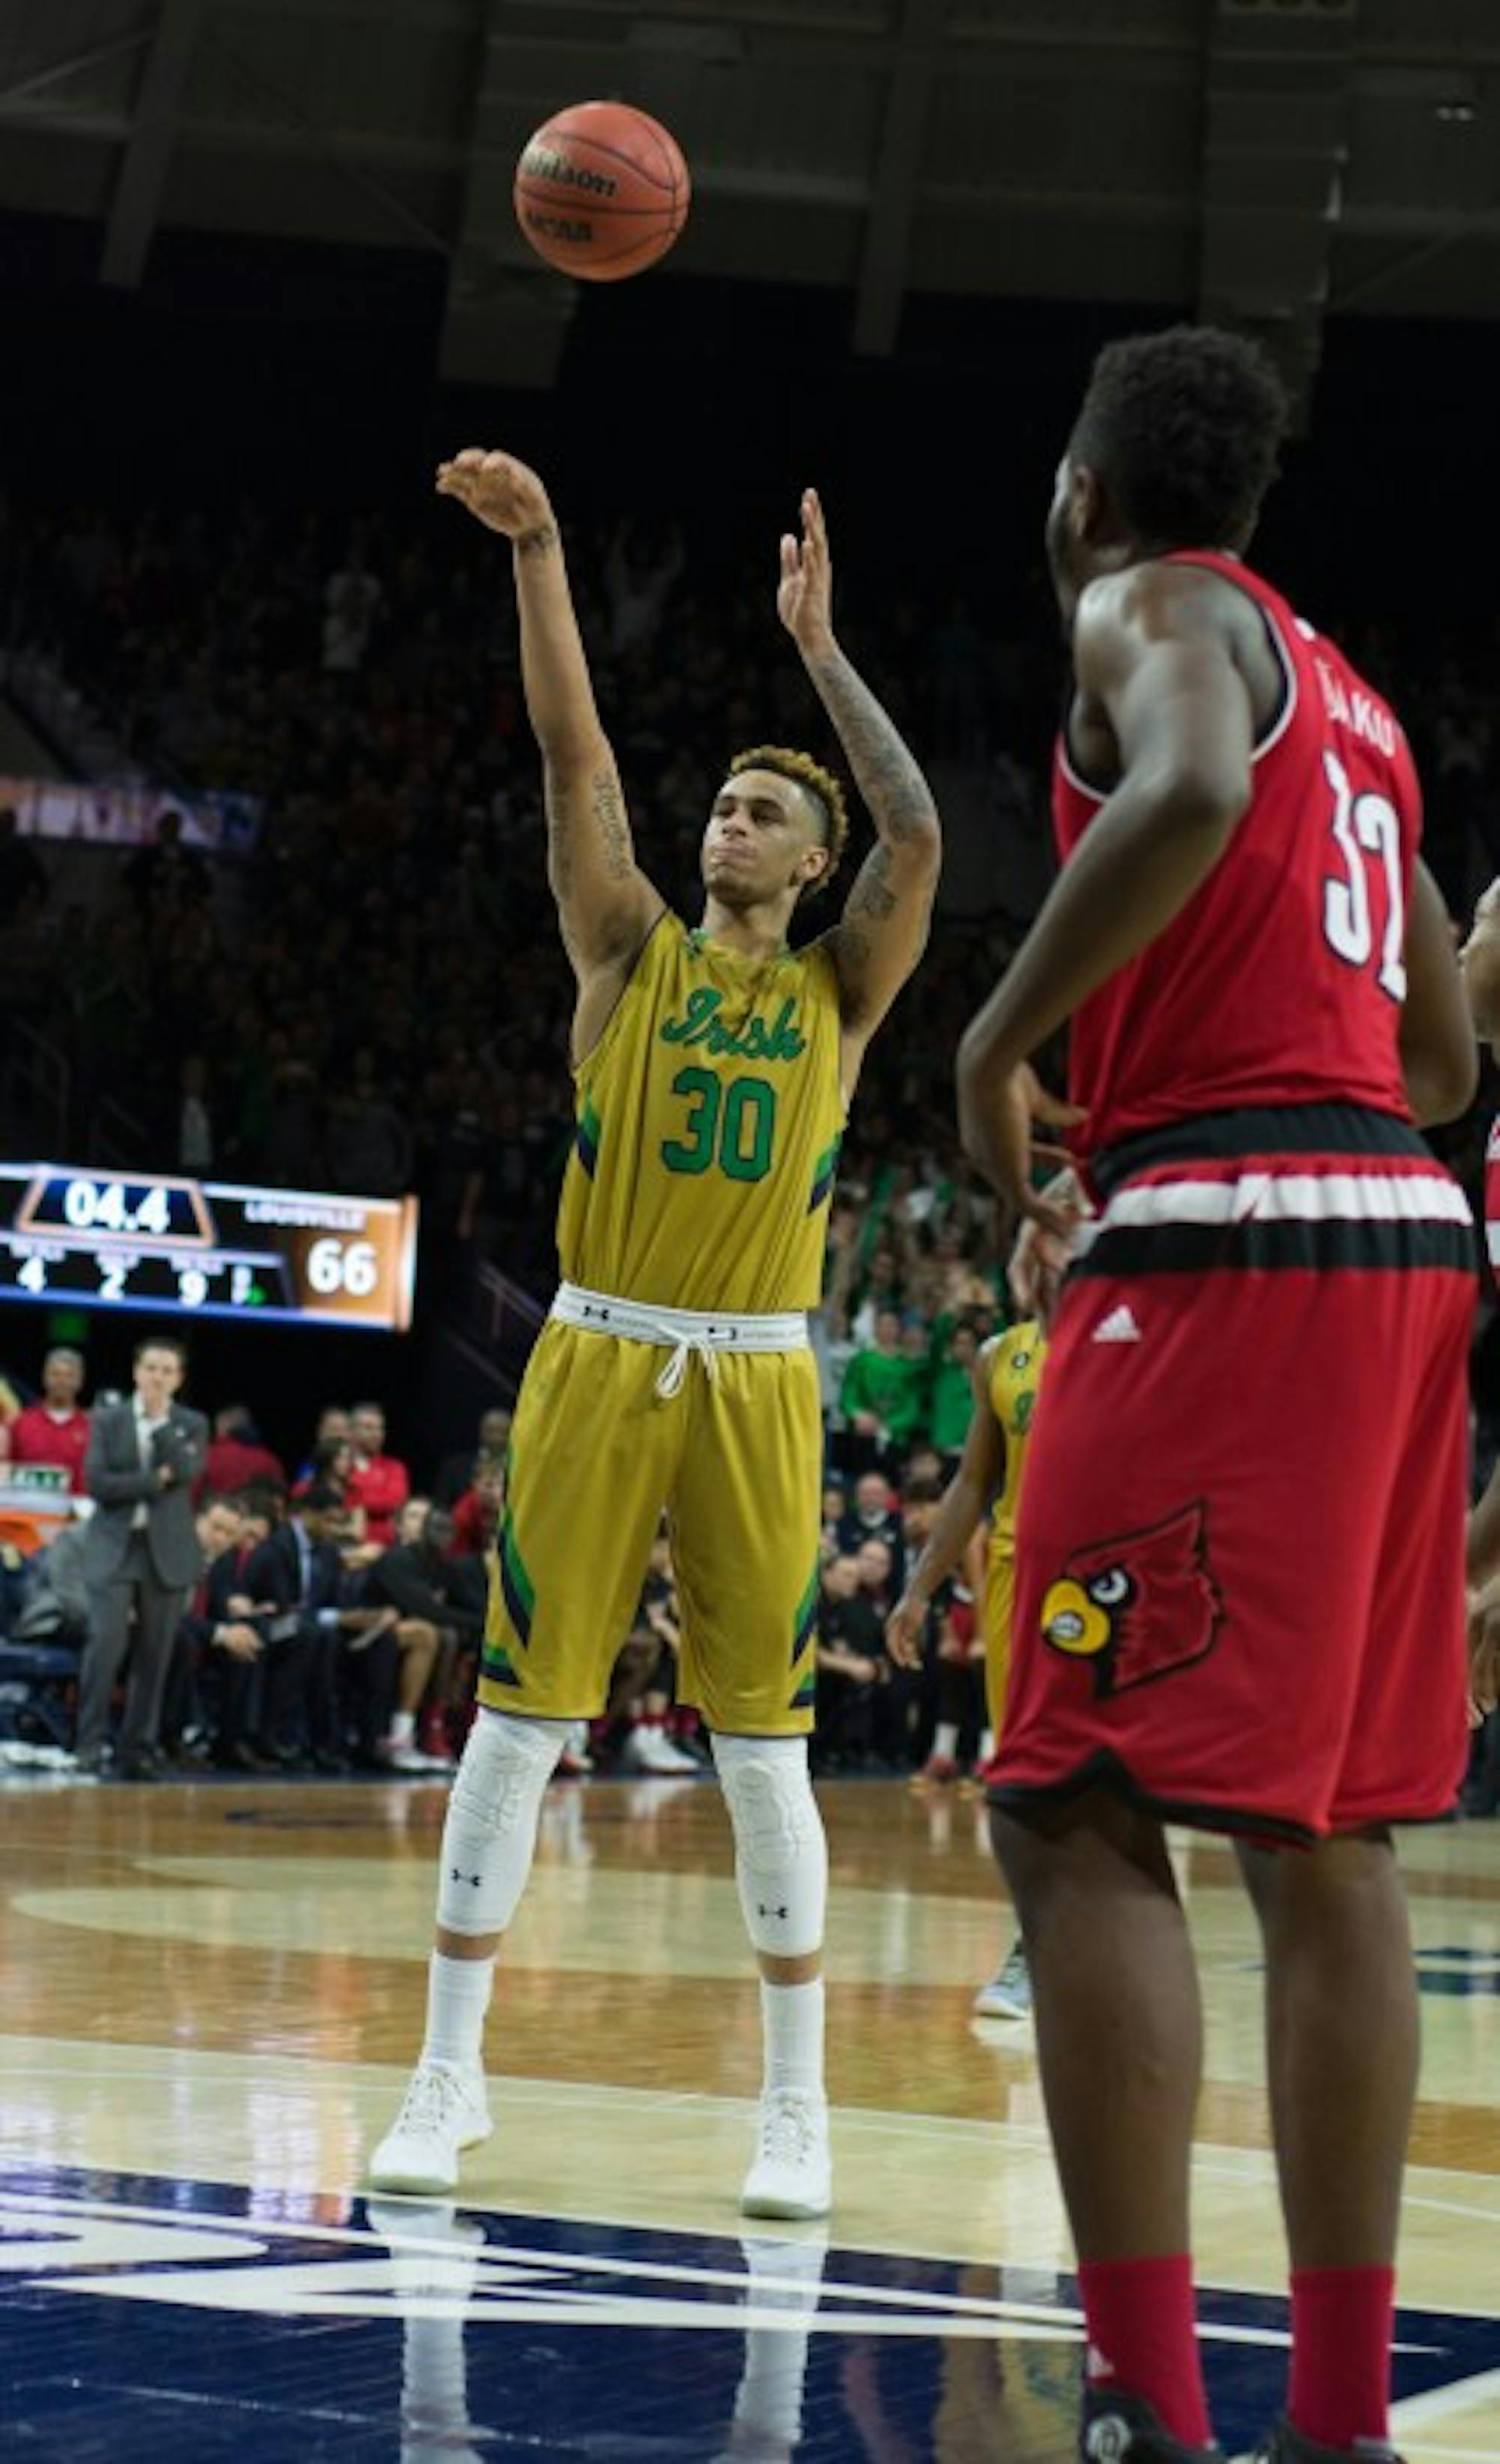 Irish senior forward Zach Auguste shoots a free throw during Notre Dame’s 71-66 win over Louisville on Feb. 13 at Purcell Pavilion.